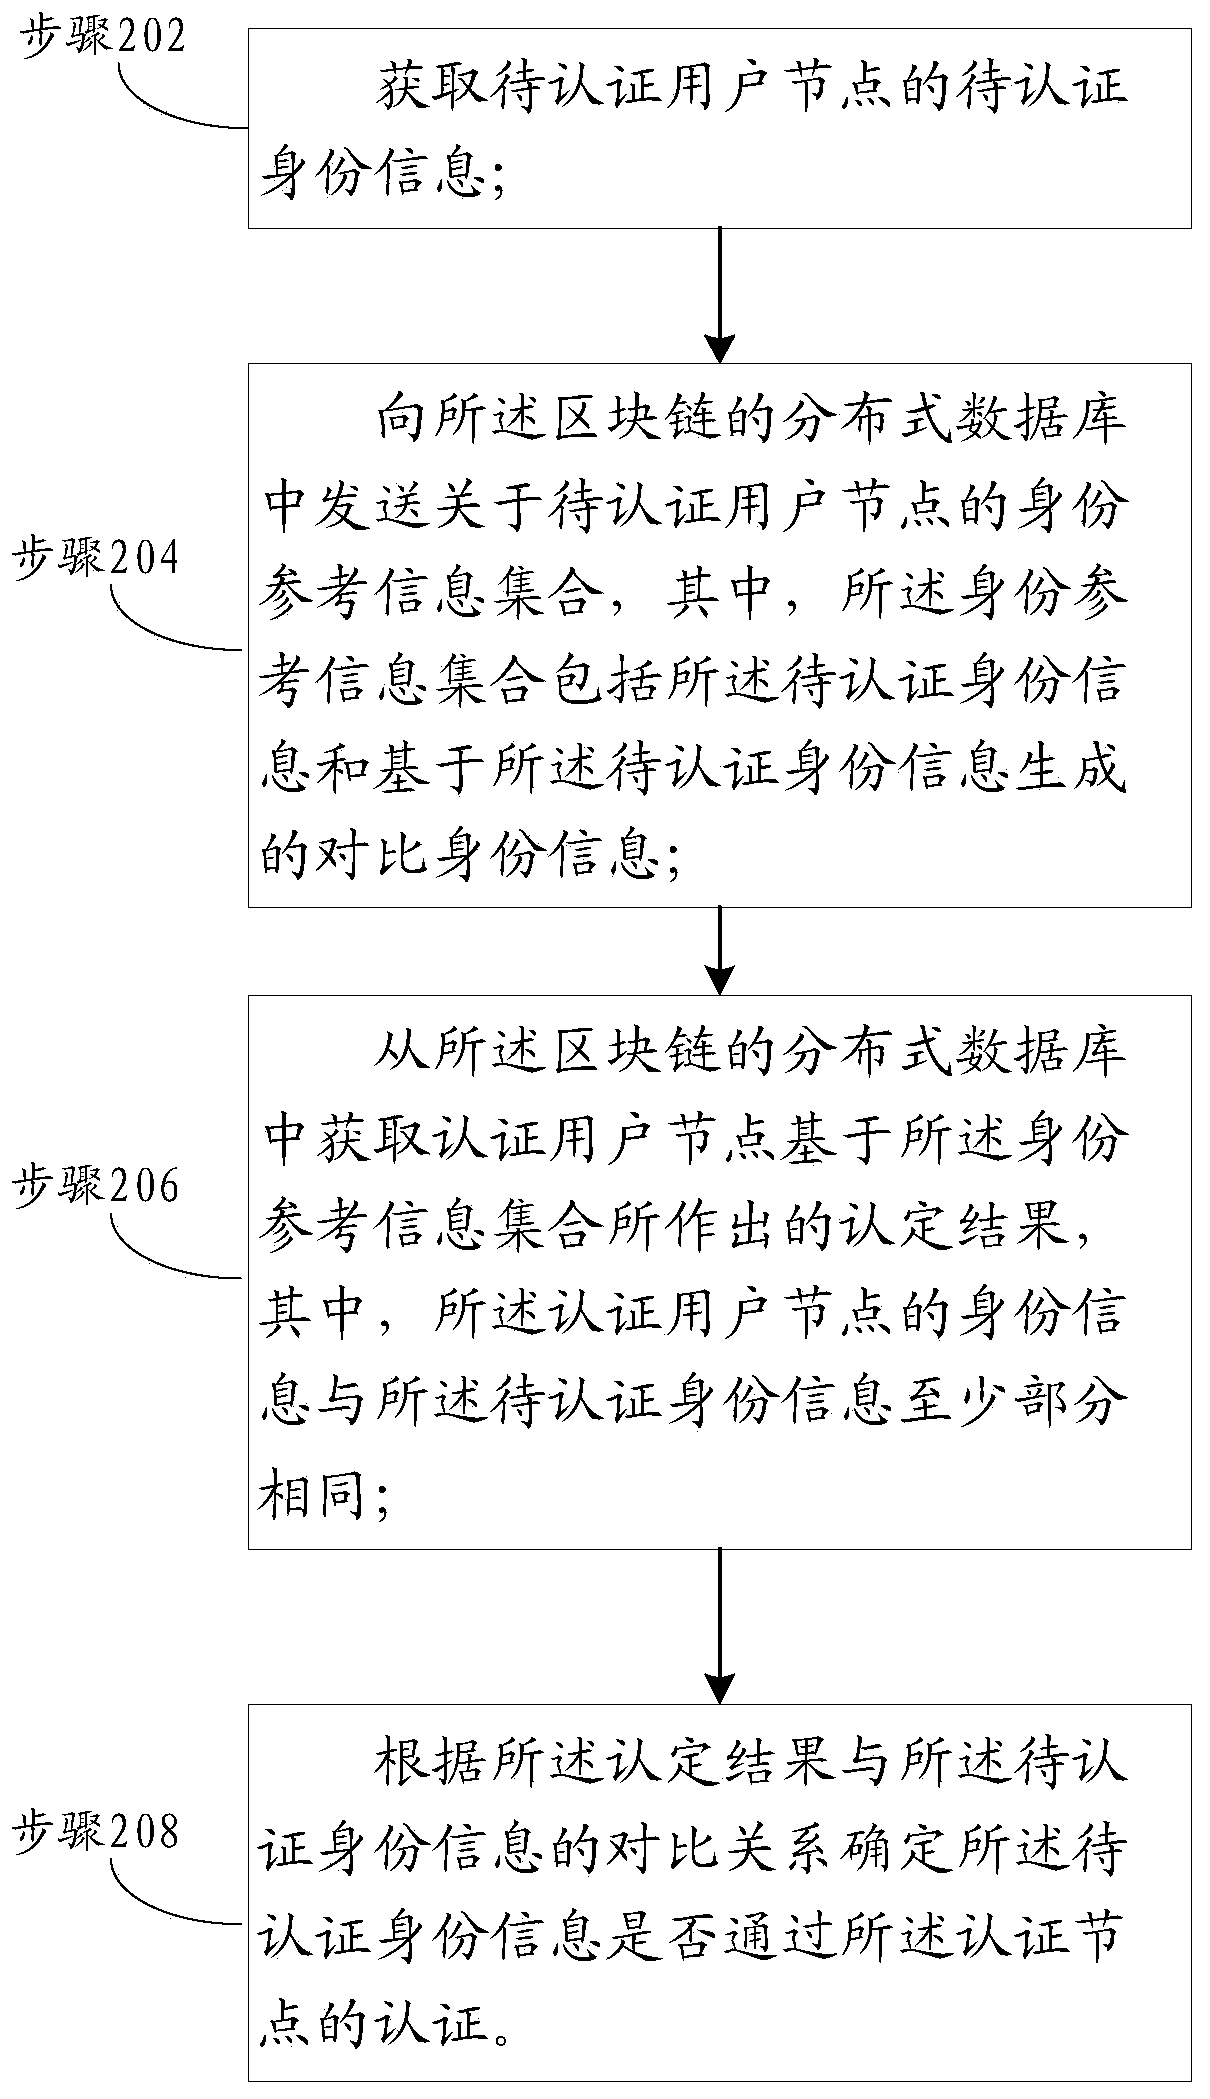 User identity authentication method and device in network